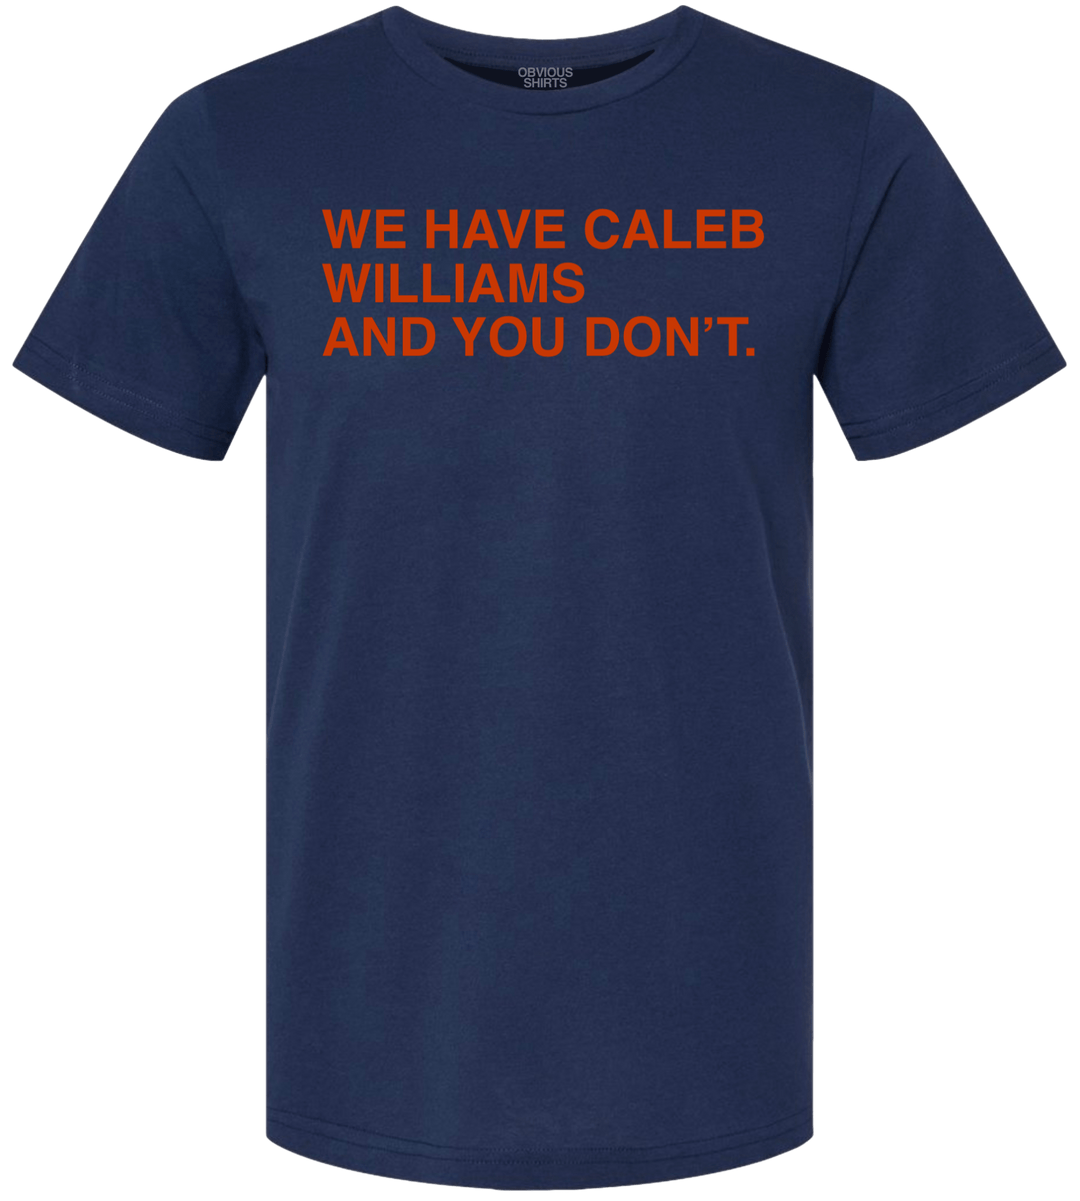 WE HAVE CALEB WILLIAMS AND YOU DON'T. - OBVIOUS SHIRTS